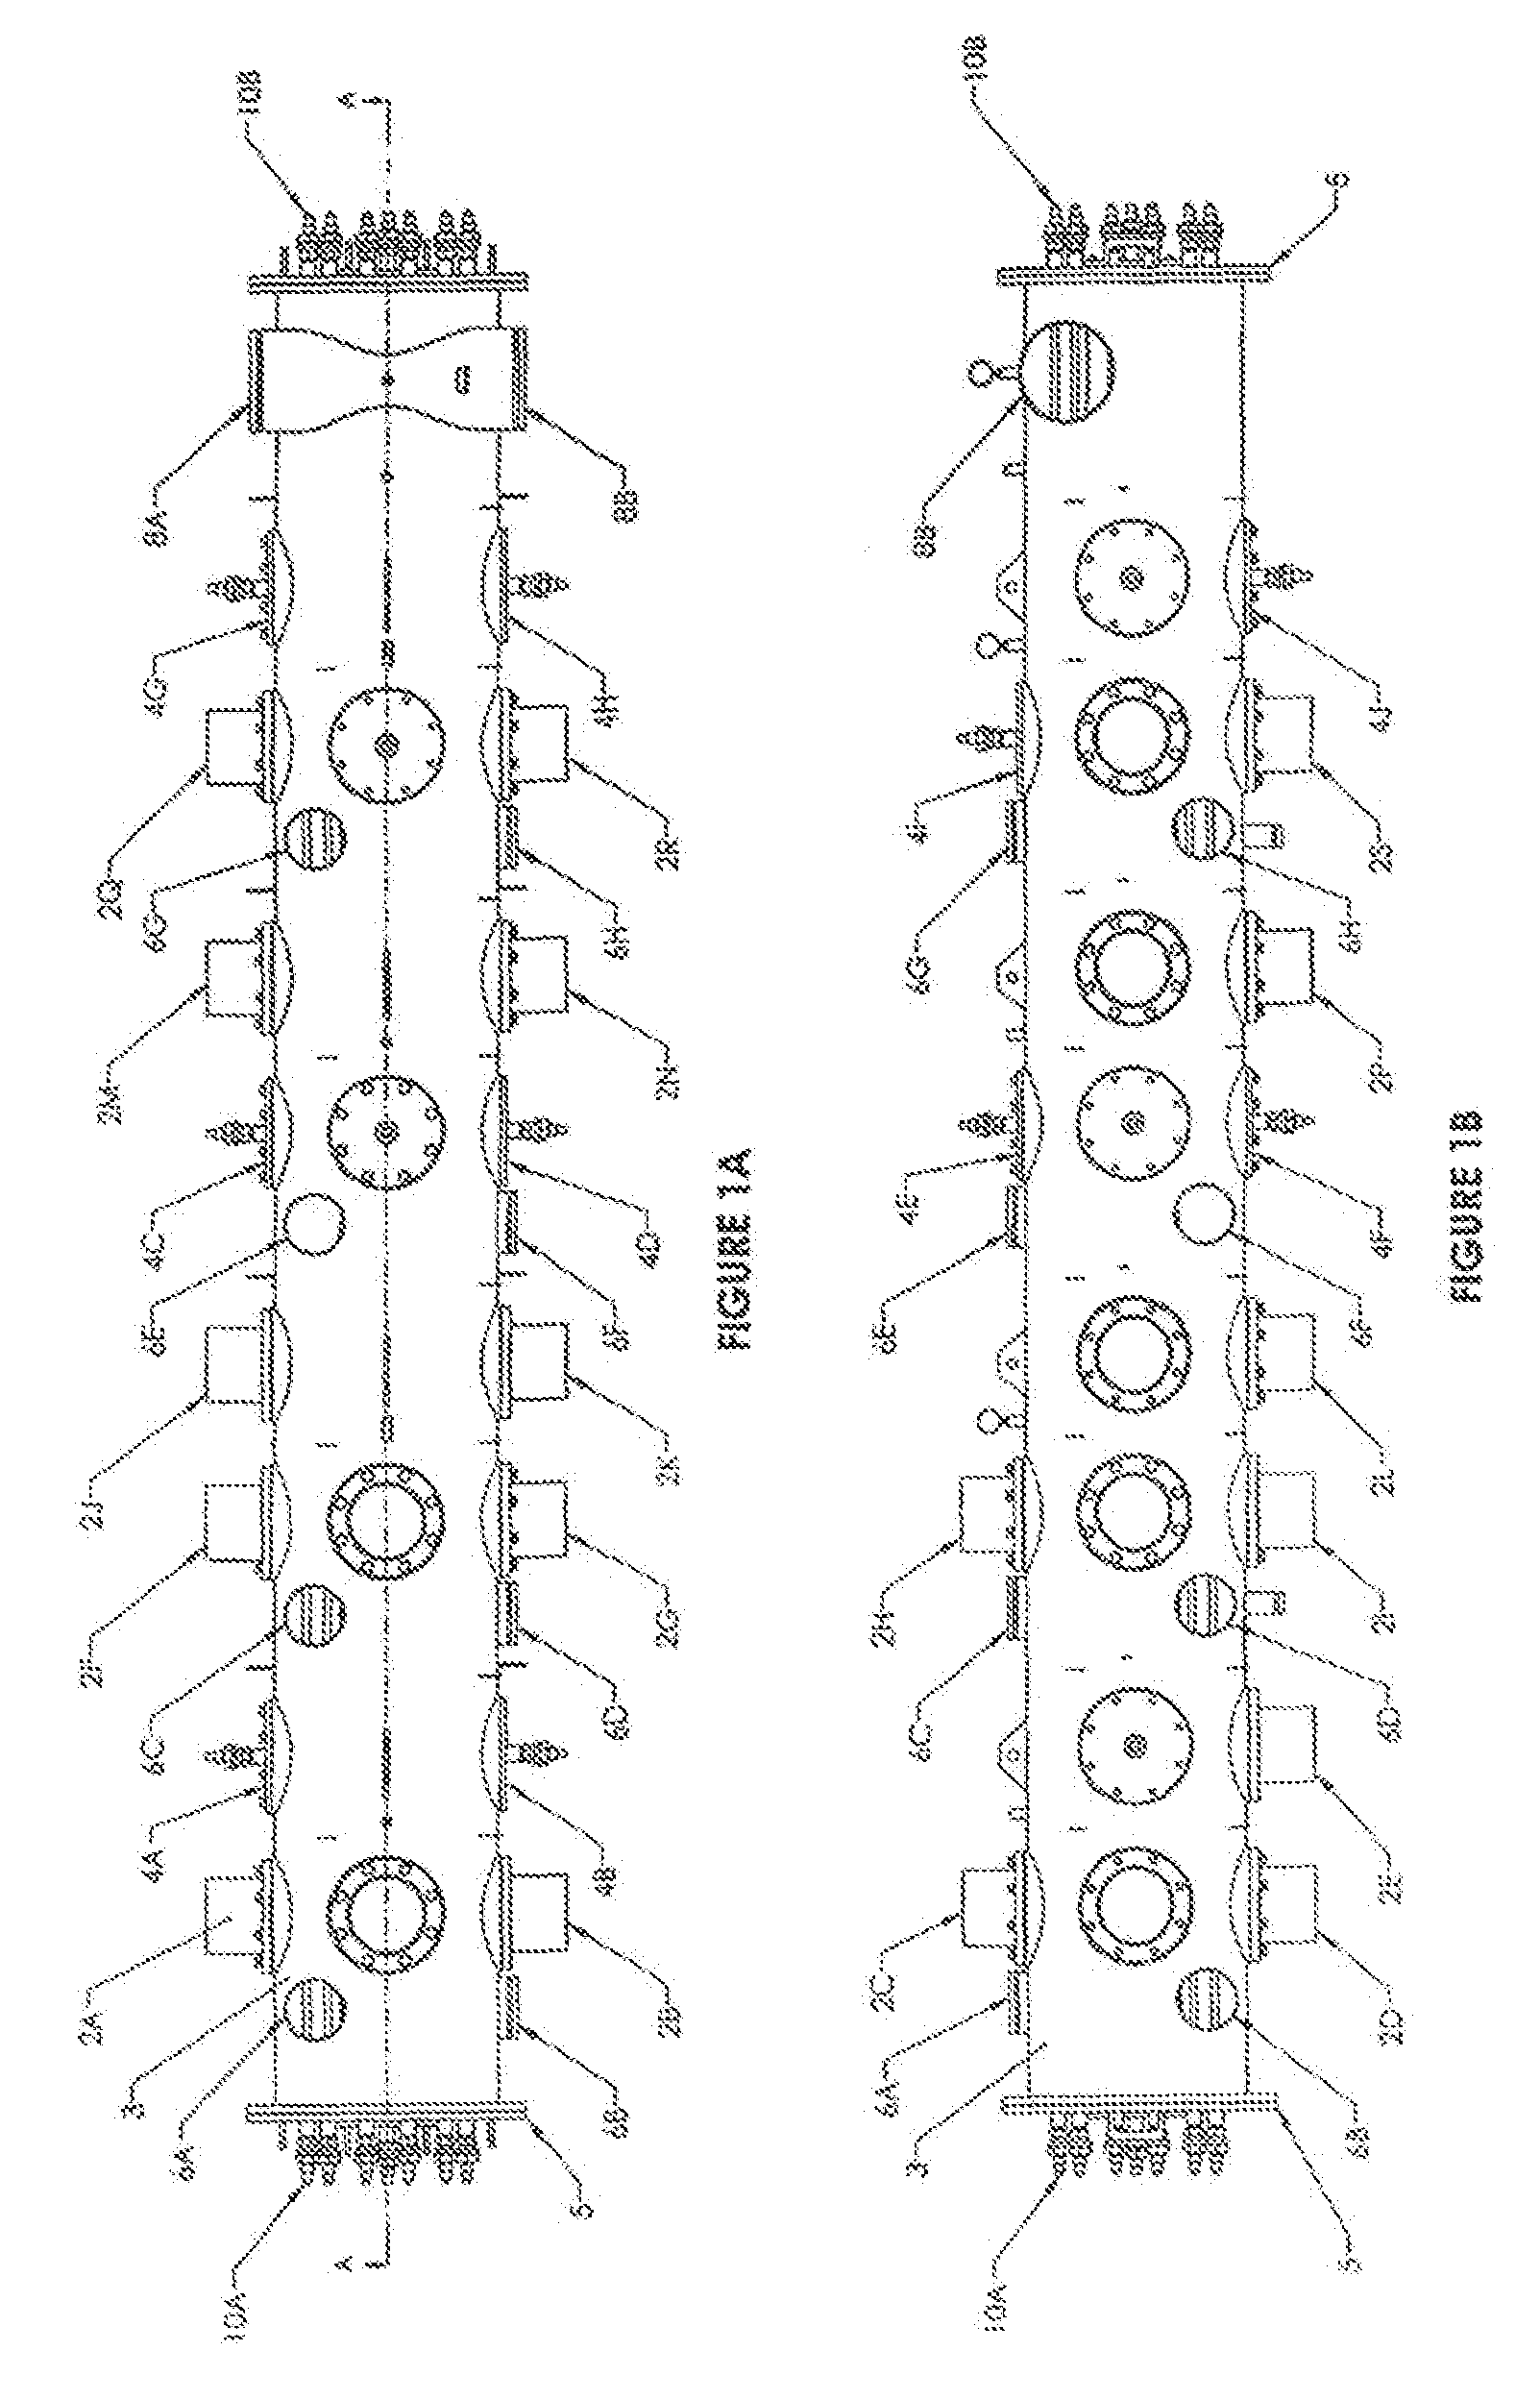 Apparatus for Treating Fluids